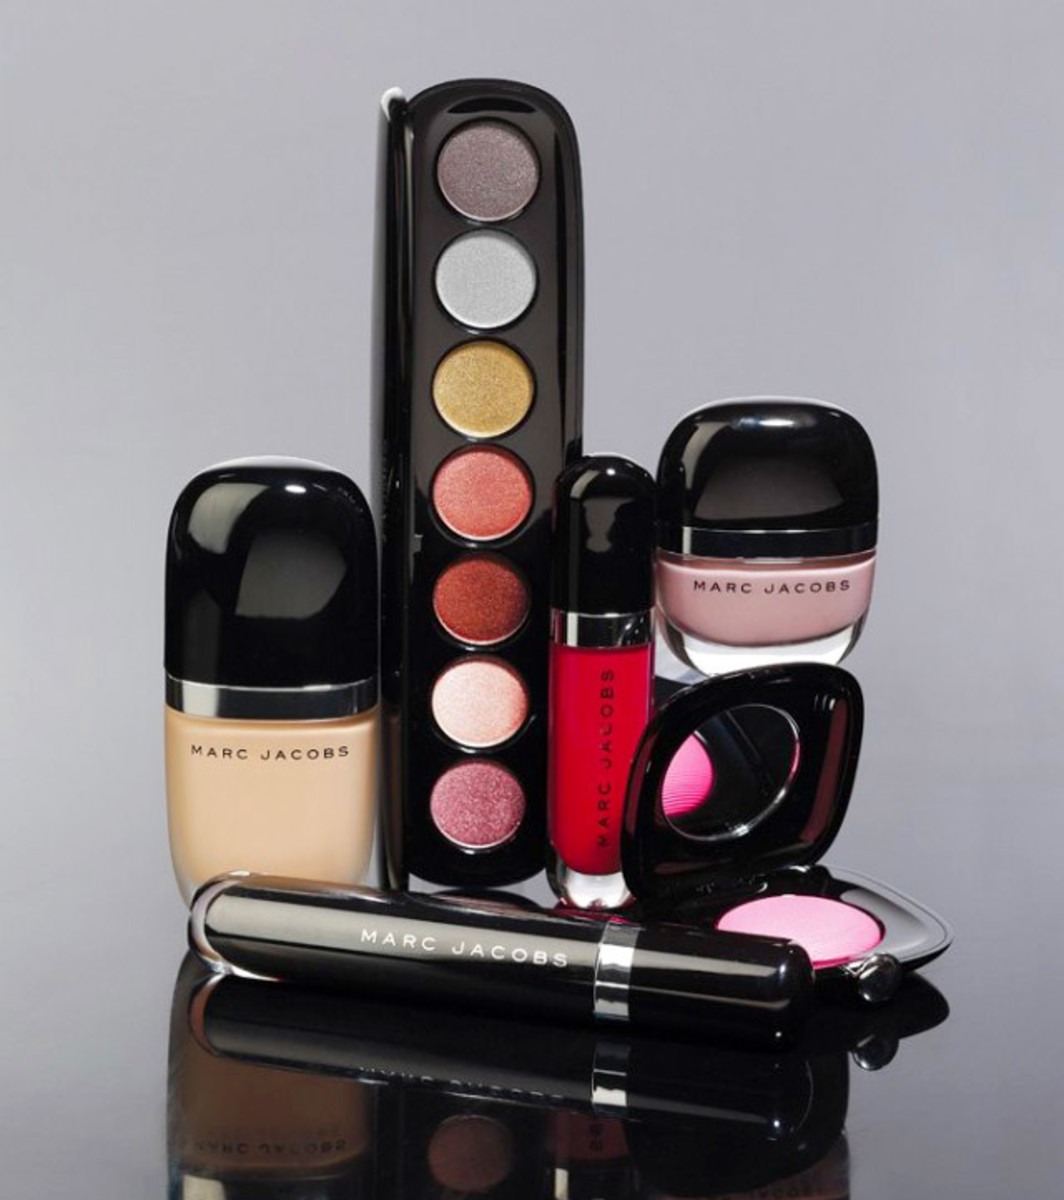 Marc Jacobs beauty makeup collection